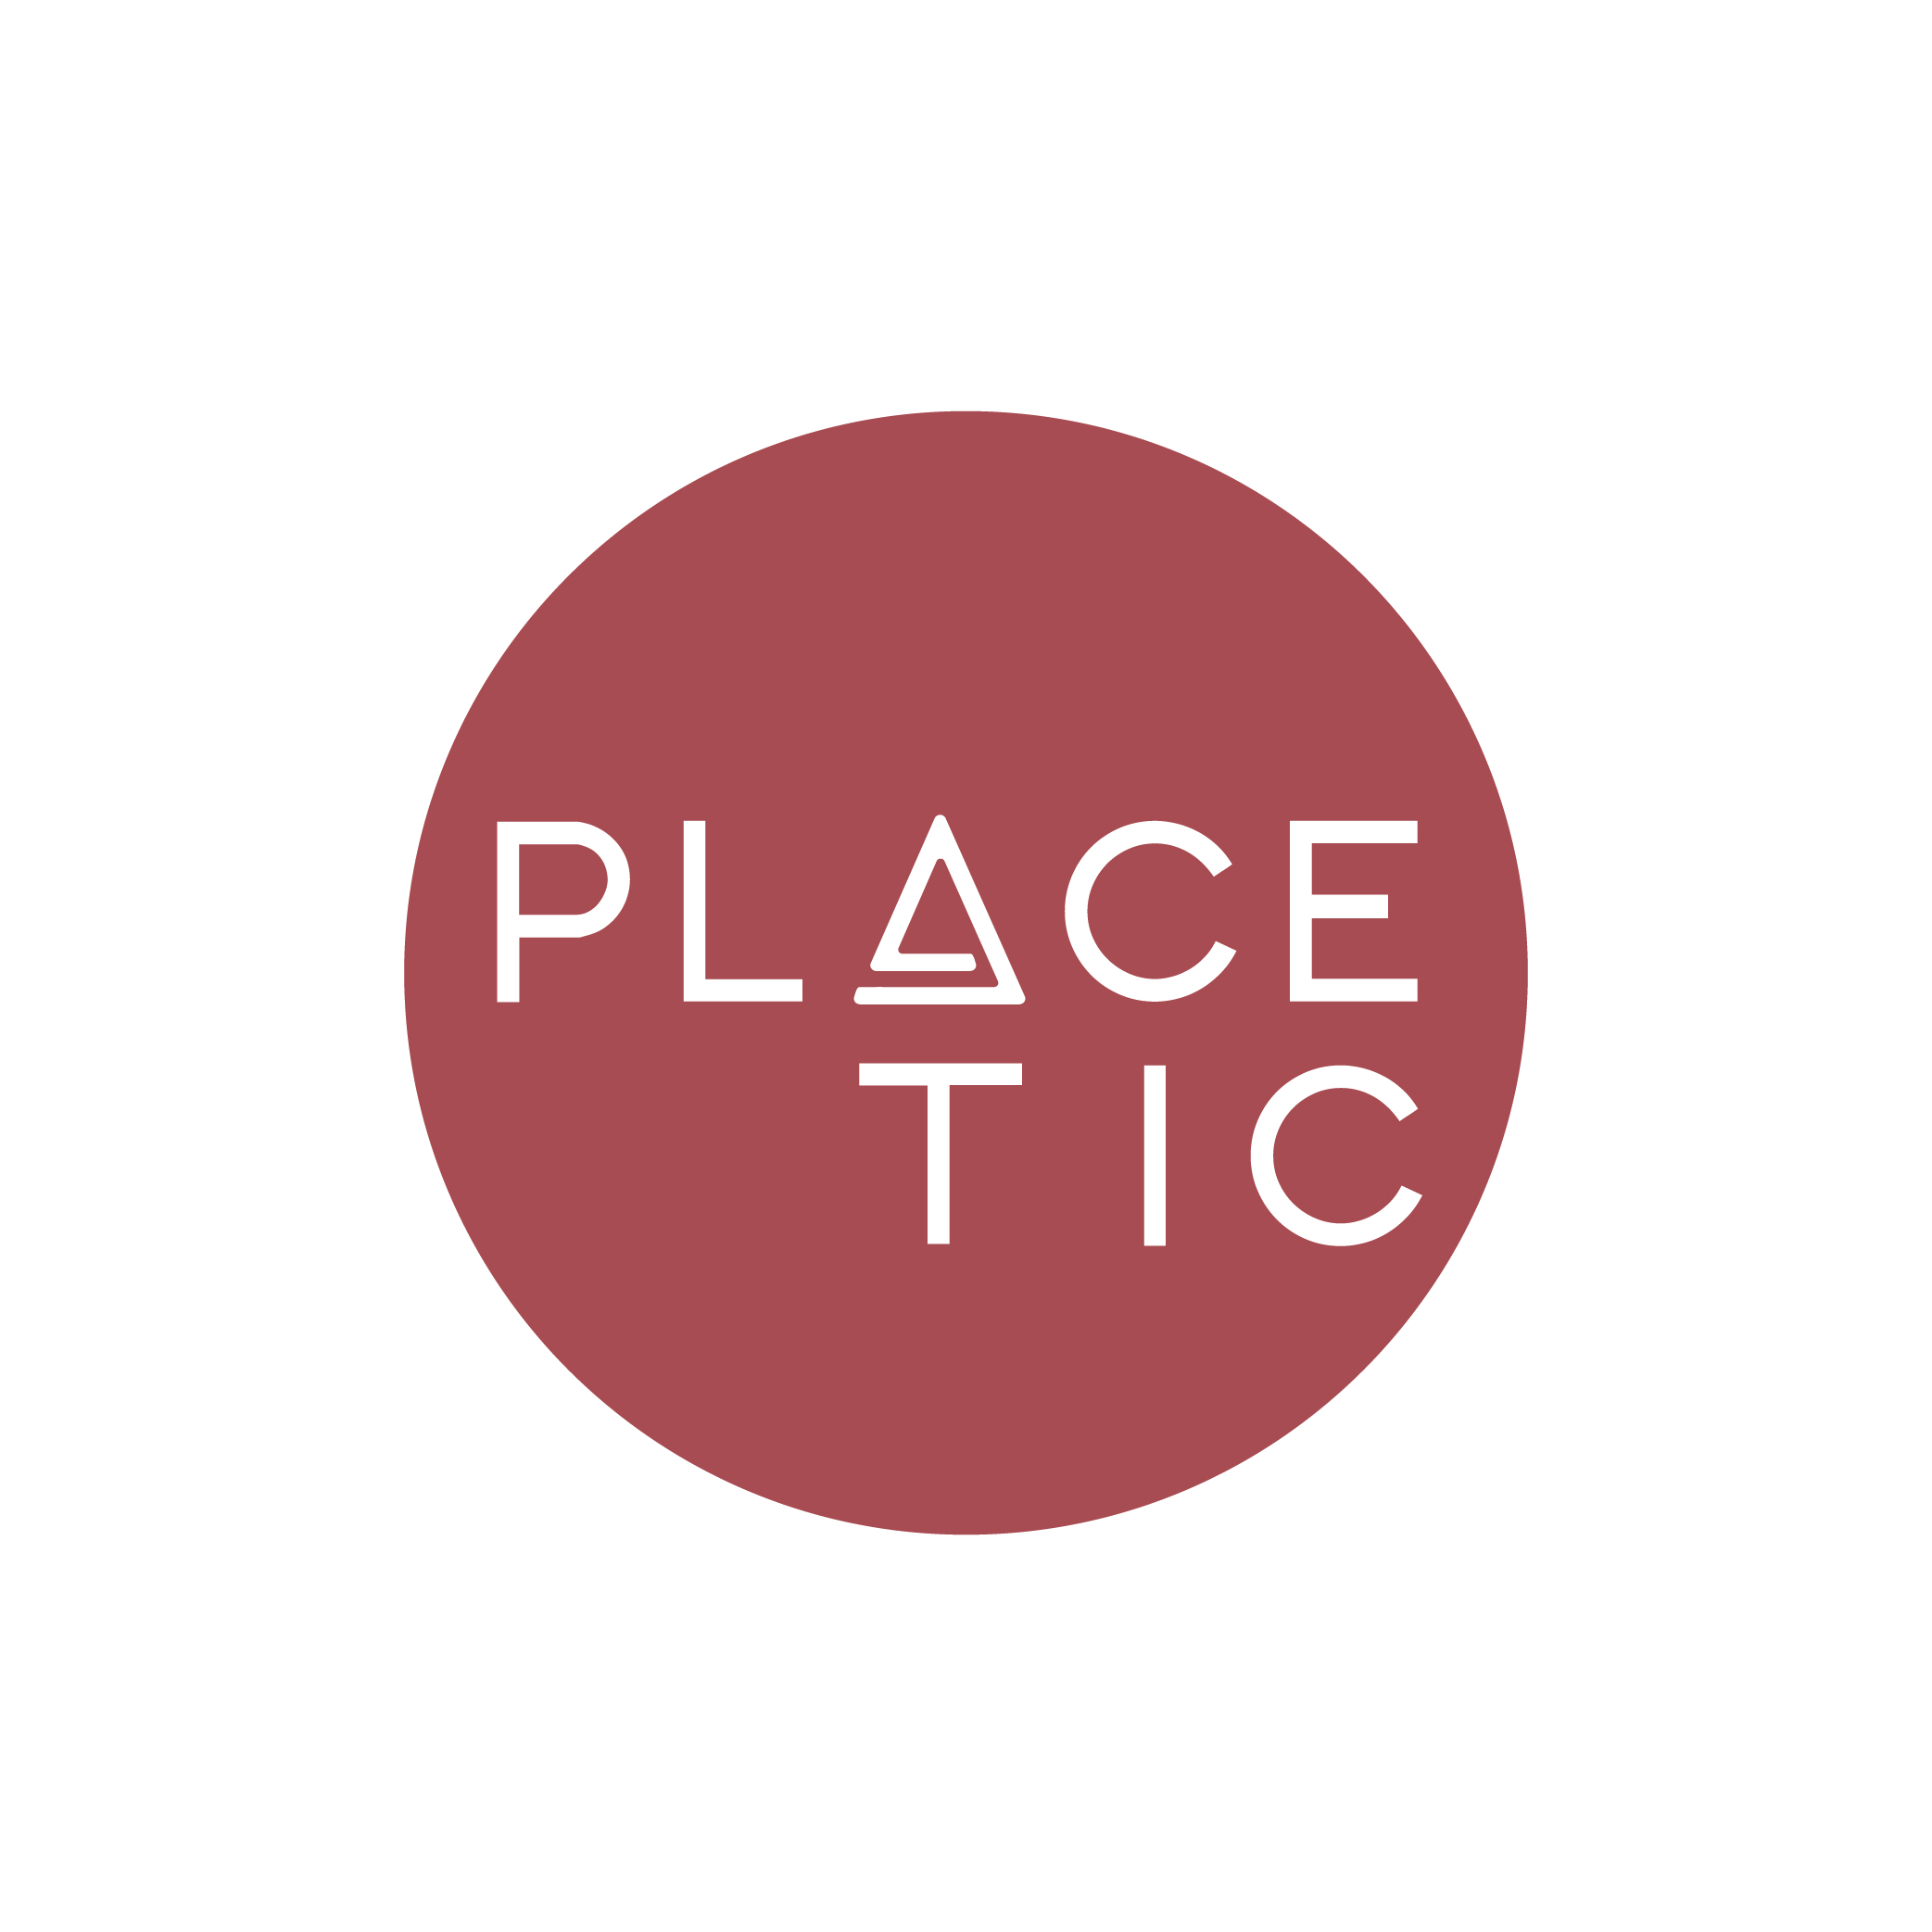 PLACE TIC